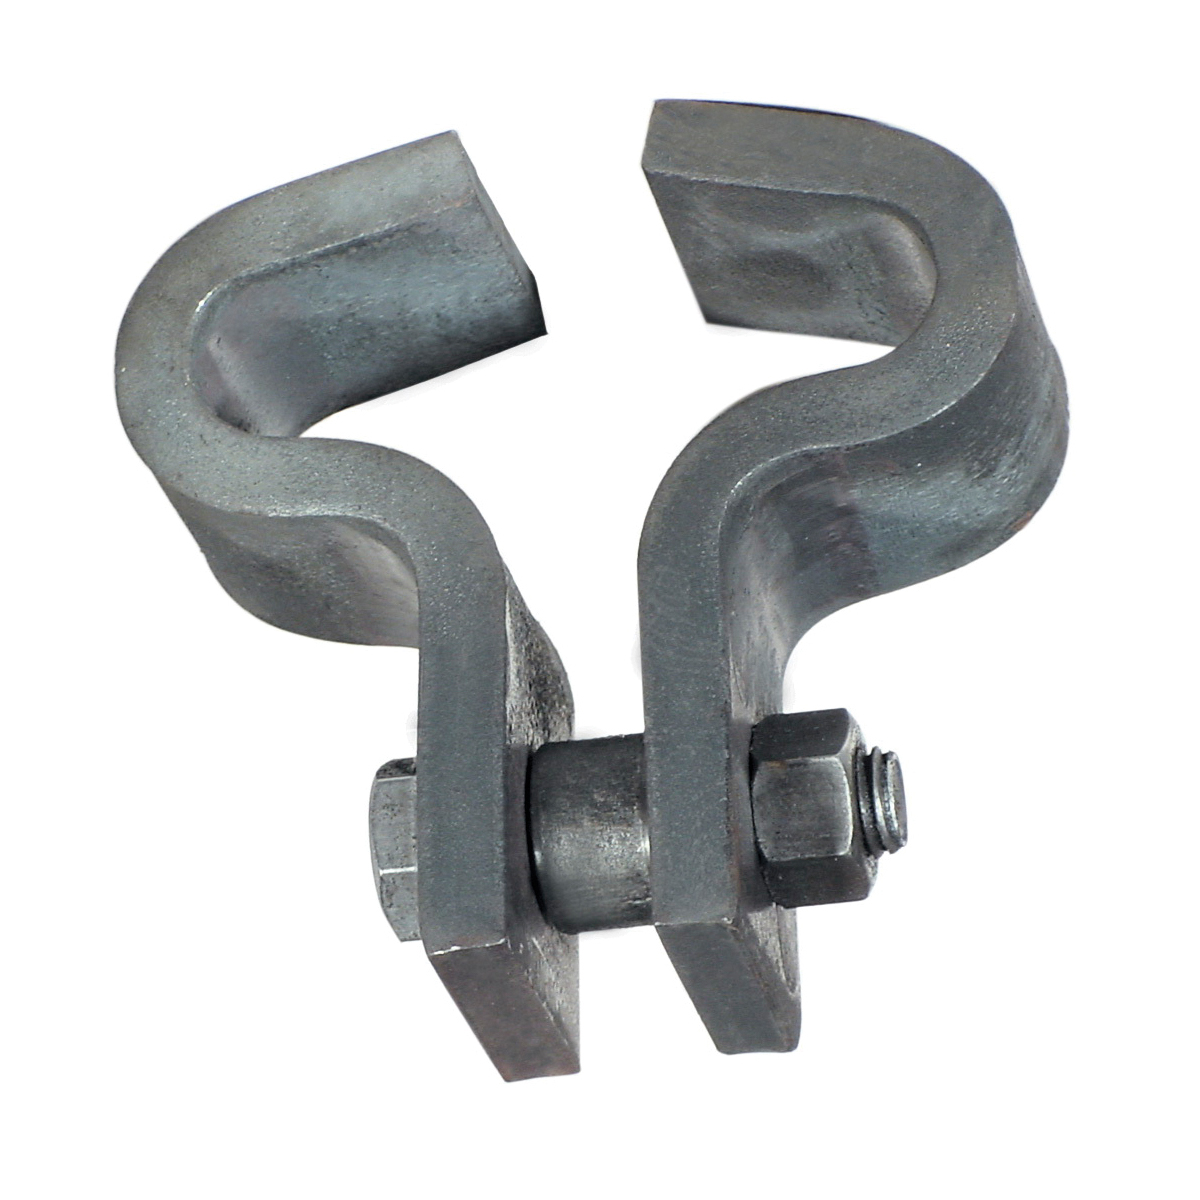 Anvil® 0500315106 FIG 134 Heavy Duty Beam Clamp, 10 in Rod, 1 in THK Flange, 3000 lb Load, Carbon Steel, Galvanized